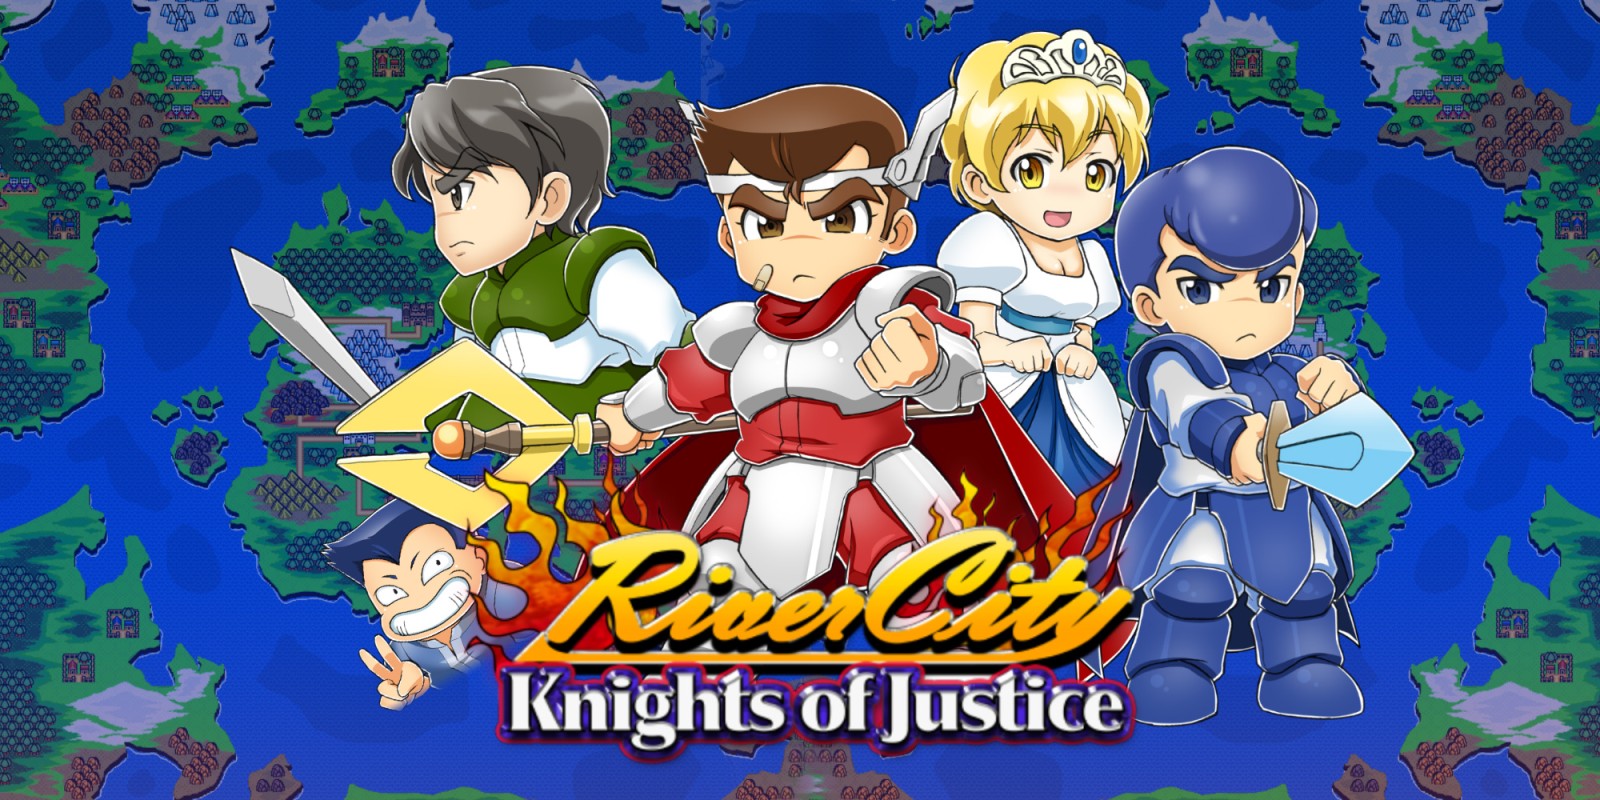 River City Knights of Justice Nintendo 3DS download.